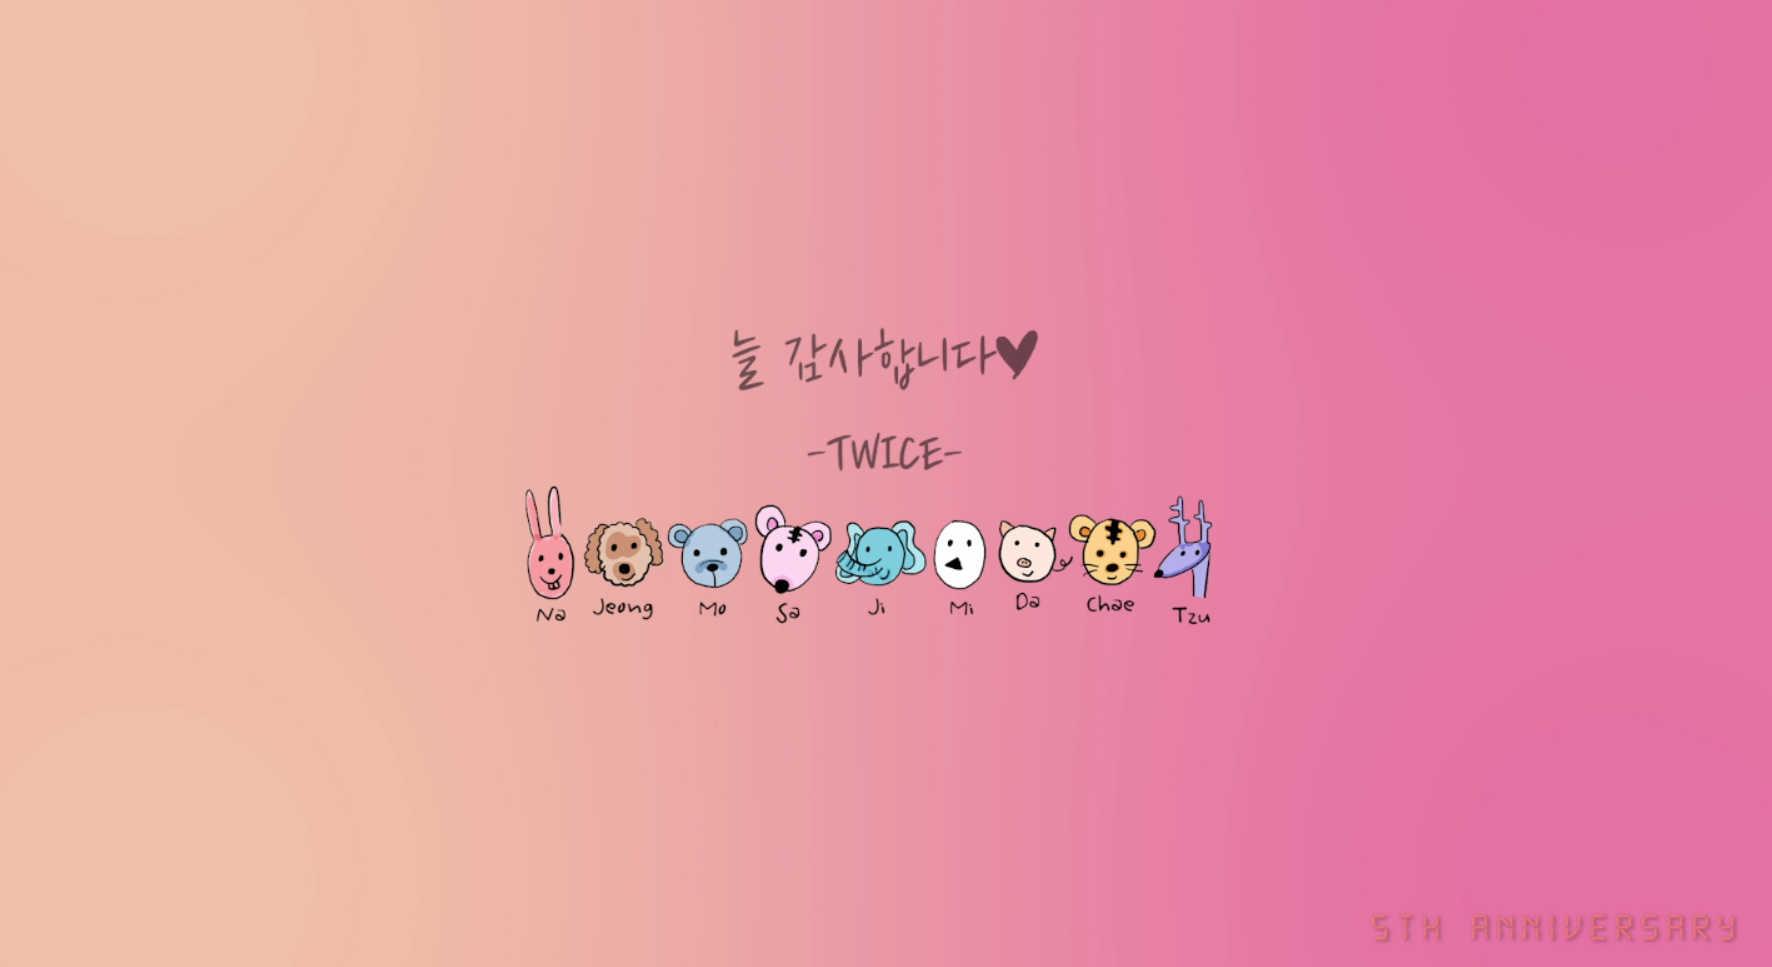 From TWICE, To ONCE